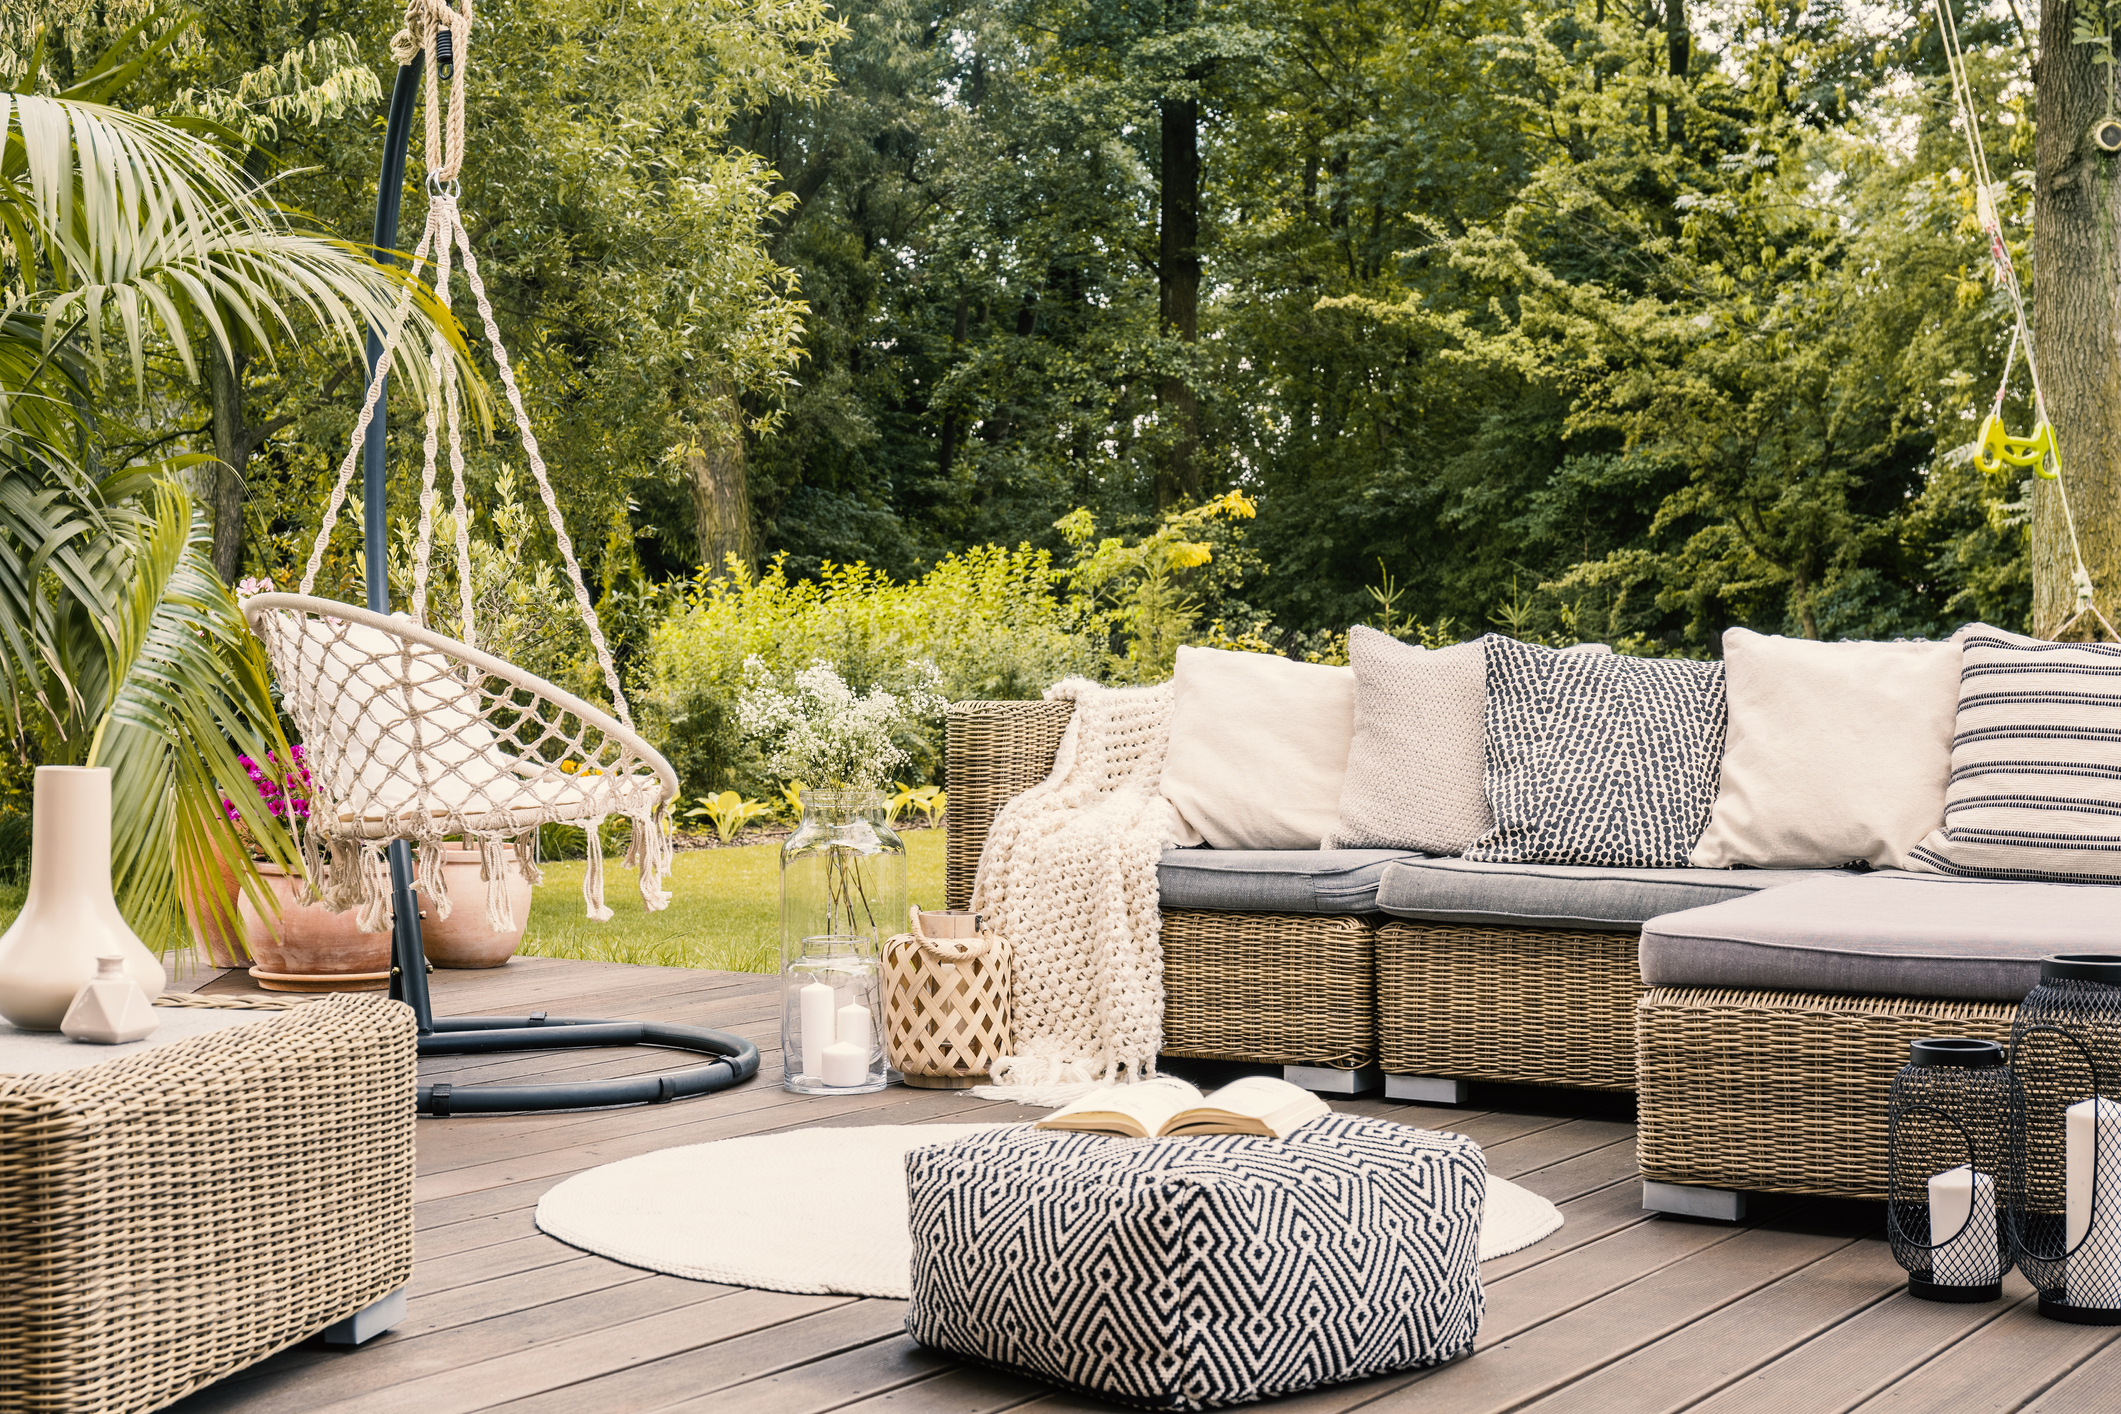 4 Styling Trends That Will Turn Your Backyard Into an Oasis